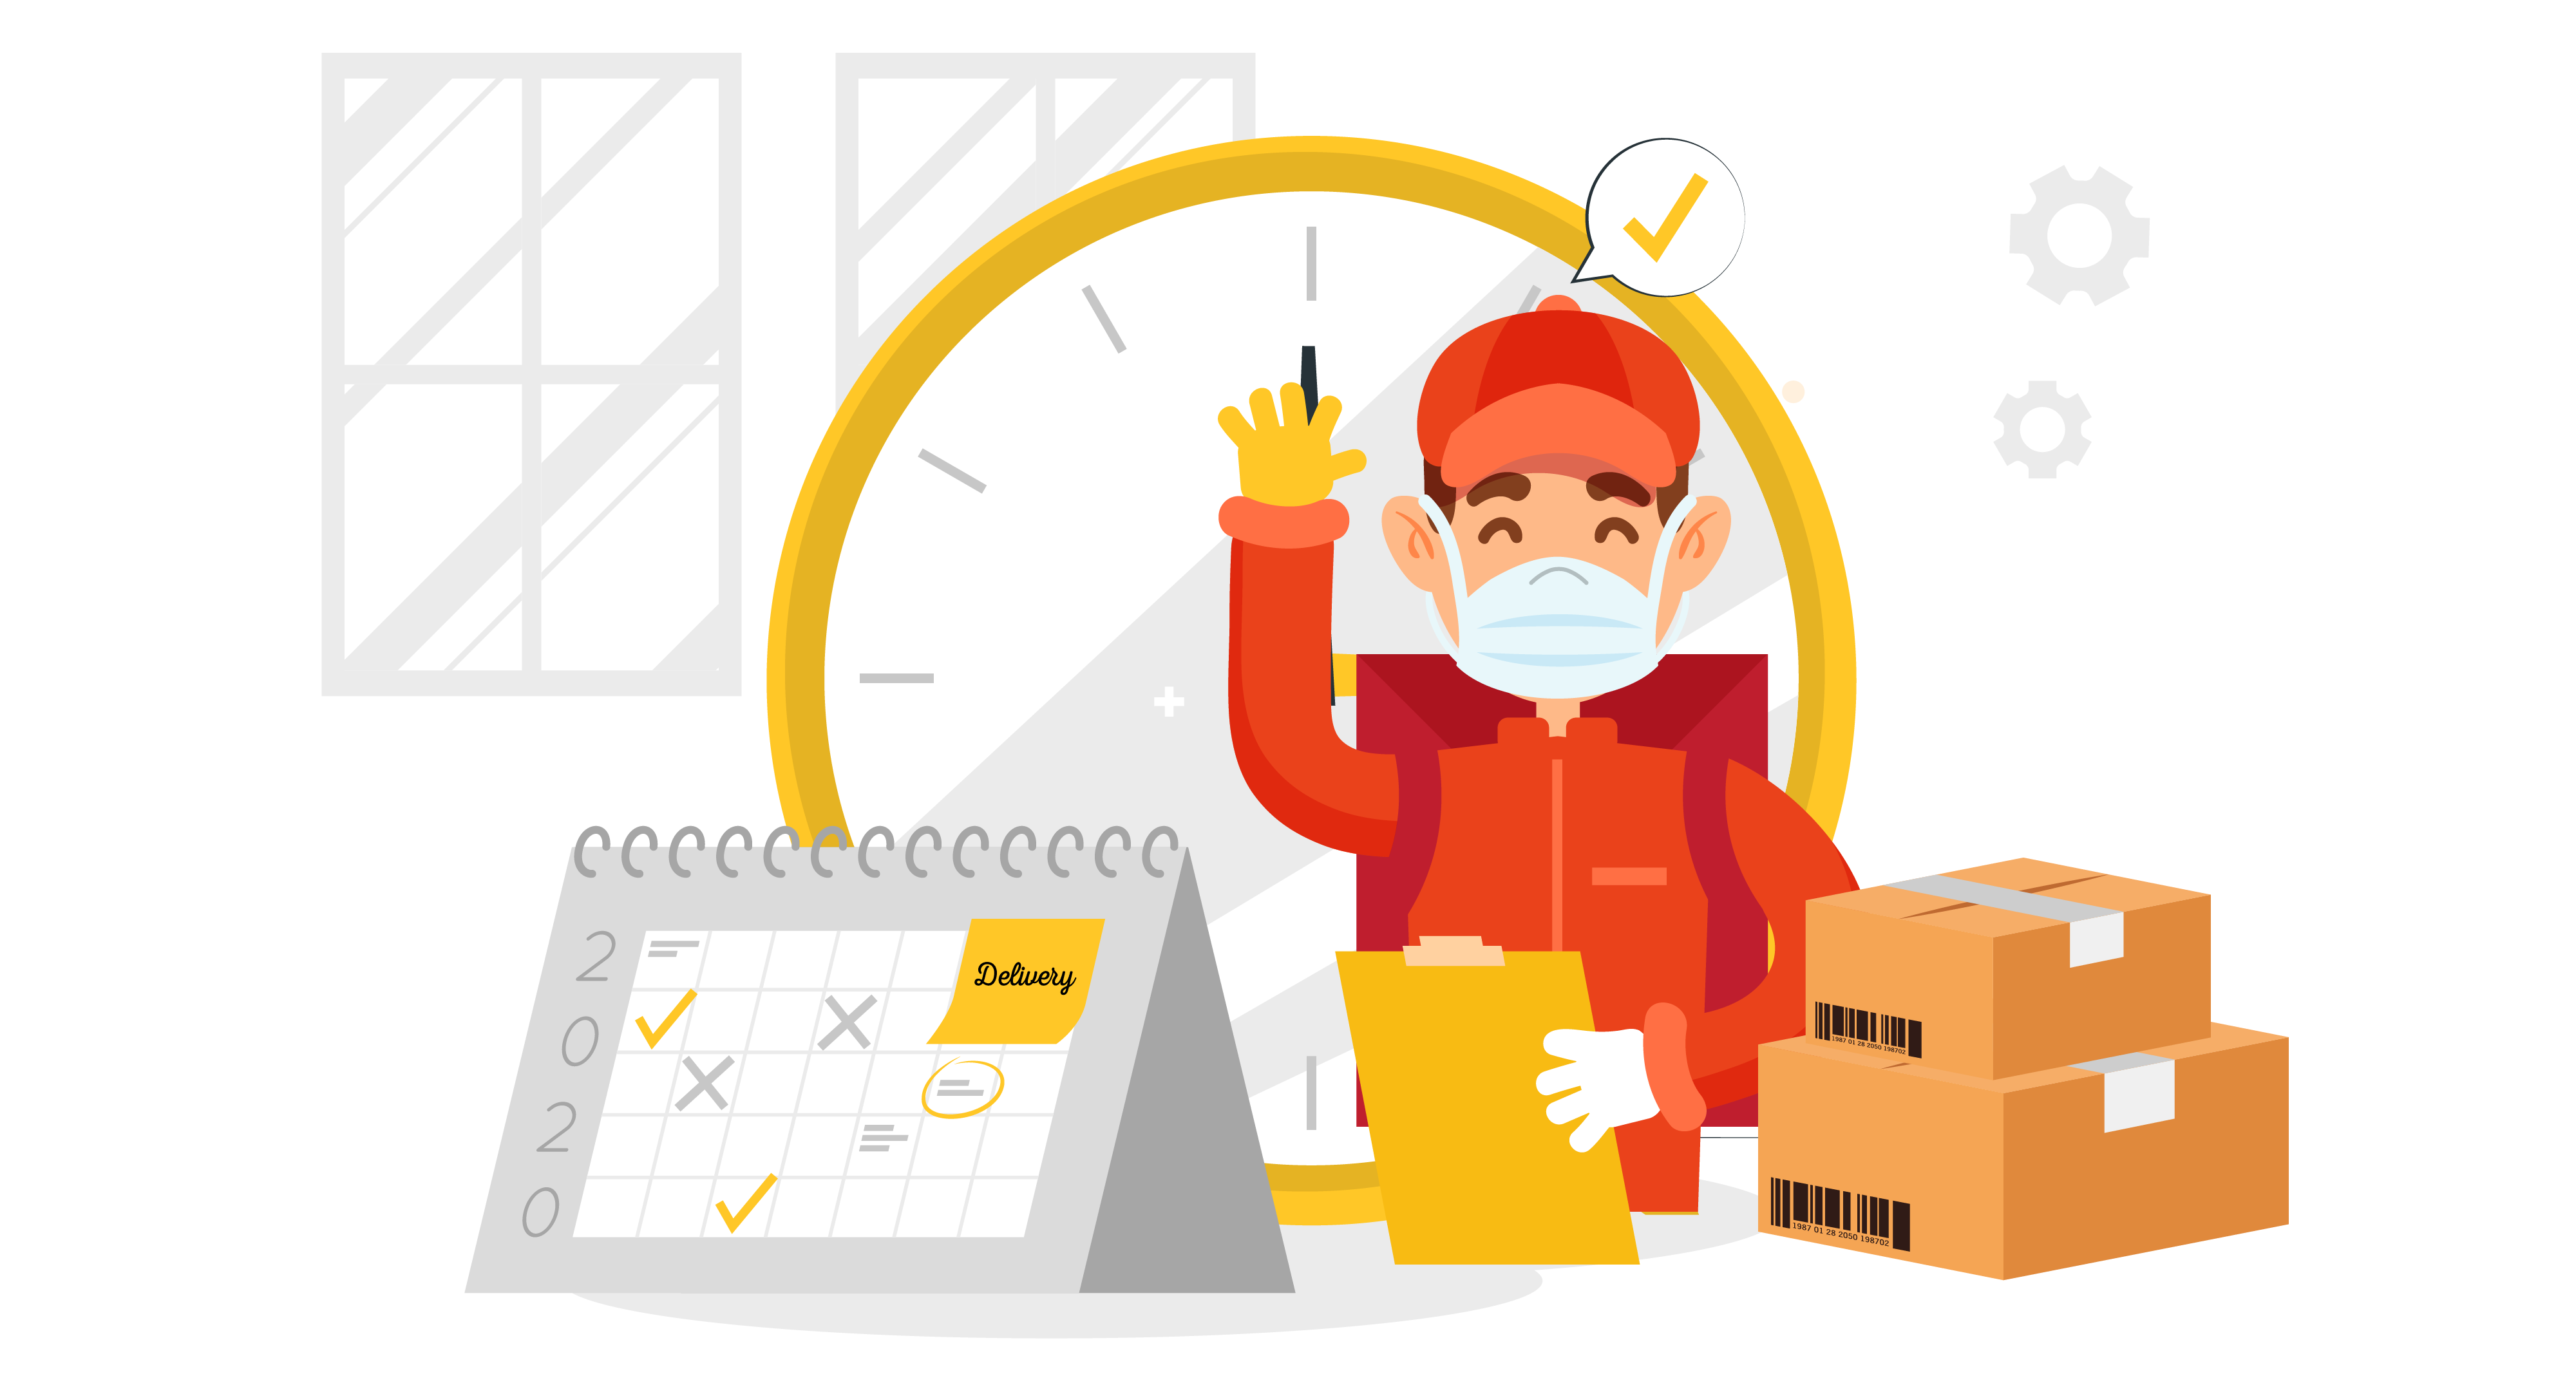 https://shippingchimp.com/blog/wp-content/uploads/2020/07/14_Why-Does-Expected-Order-Delivery-Date-Matter-To-Your-eCommerce-Store-During-The-Pandemic.png